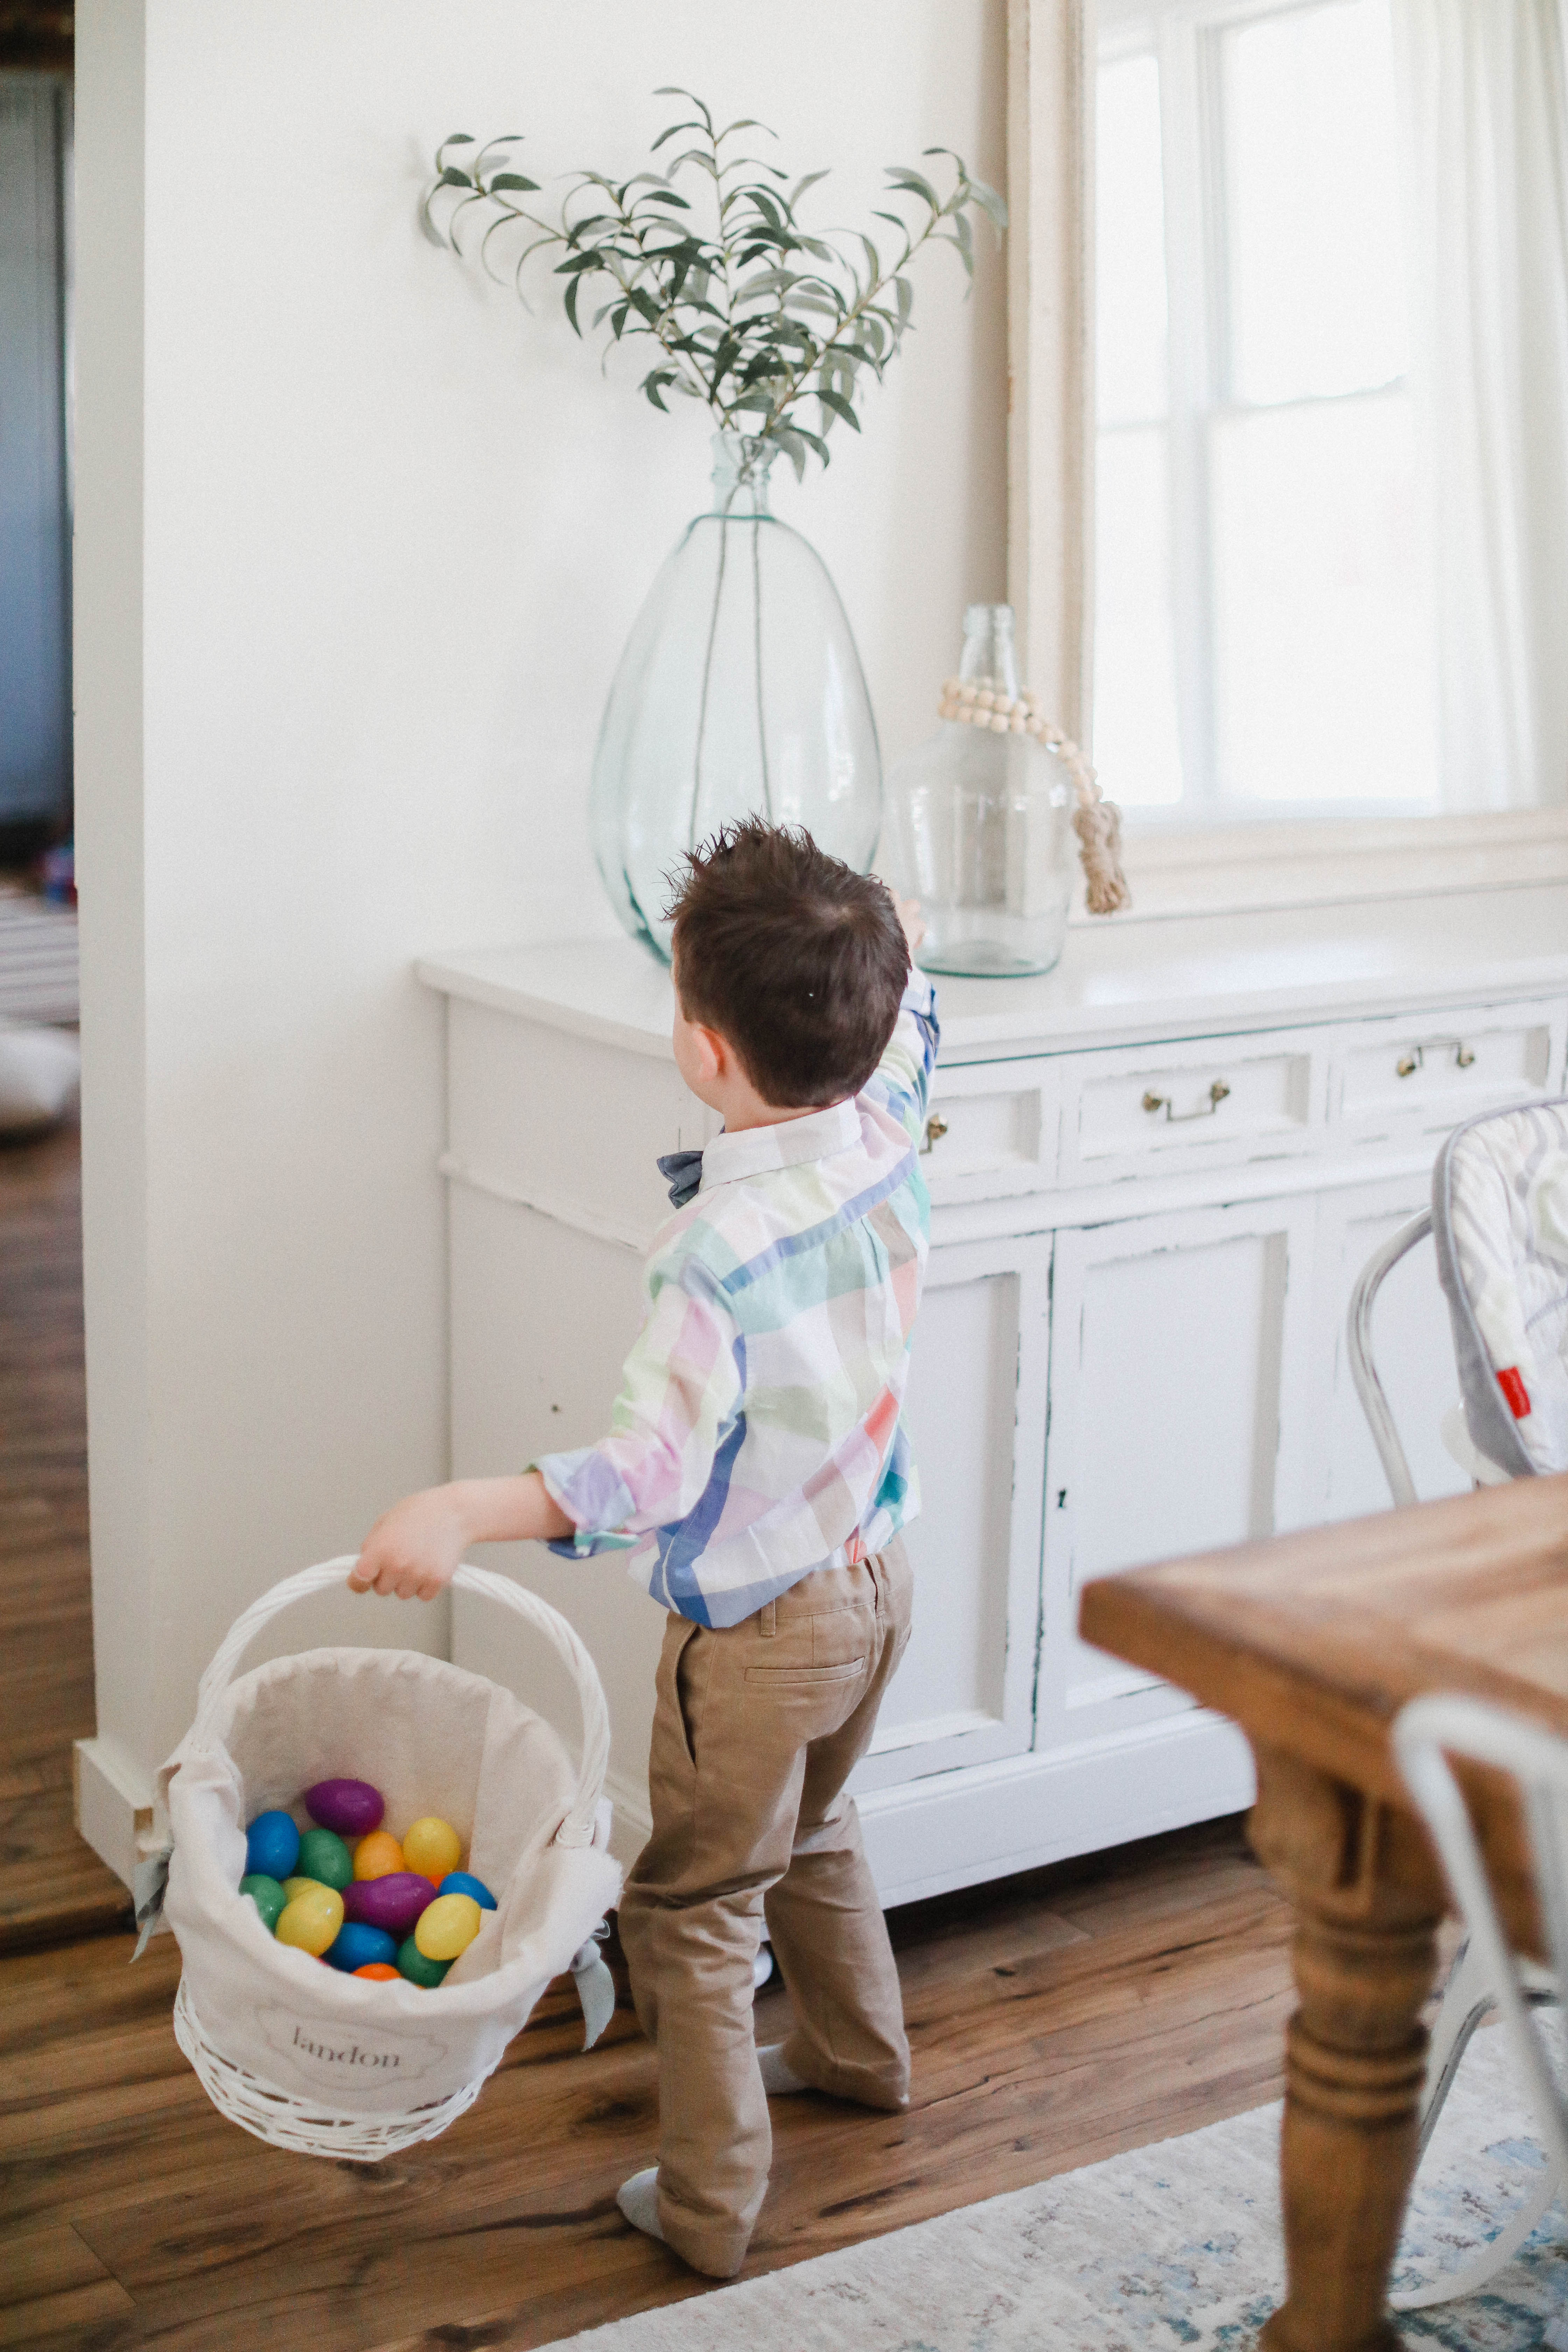 Life and style blogger Lauren McBride shares Family Easter Outfit Ideas that are color coordinated and cheerful for the holiday.